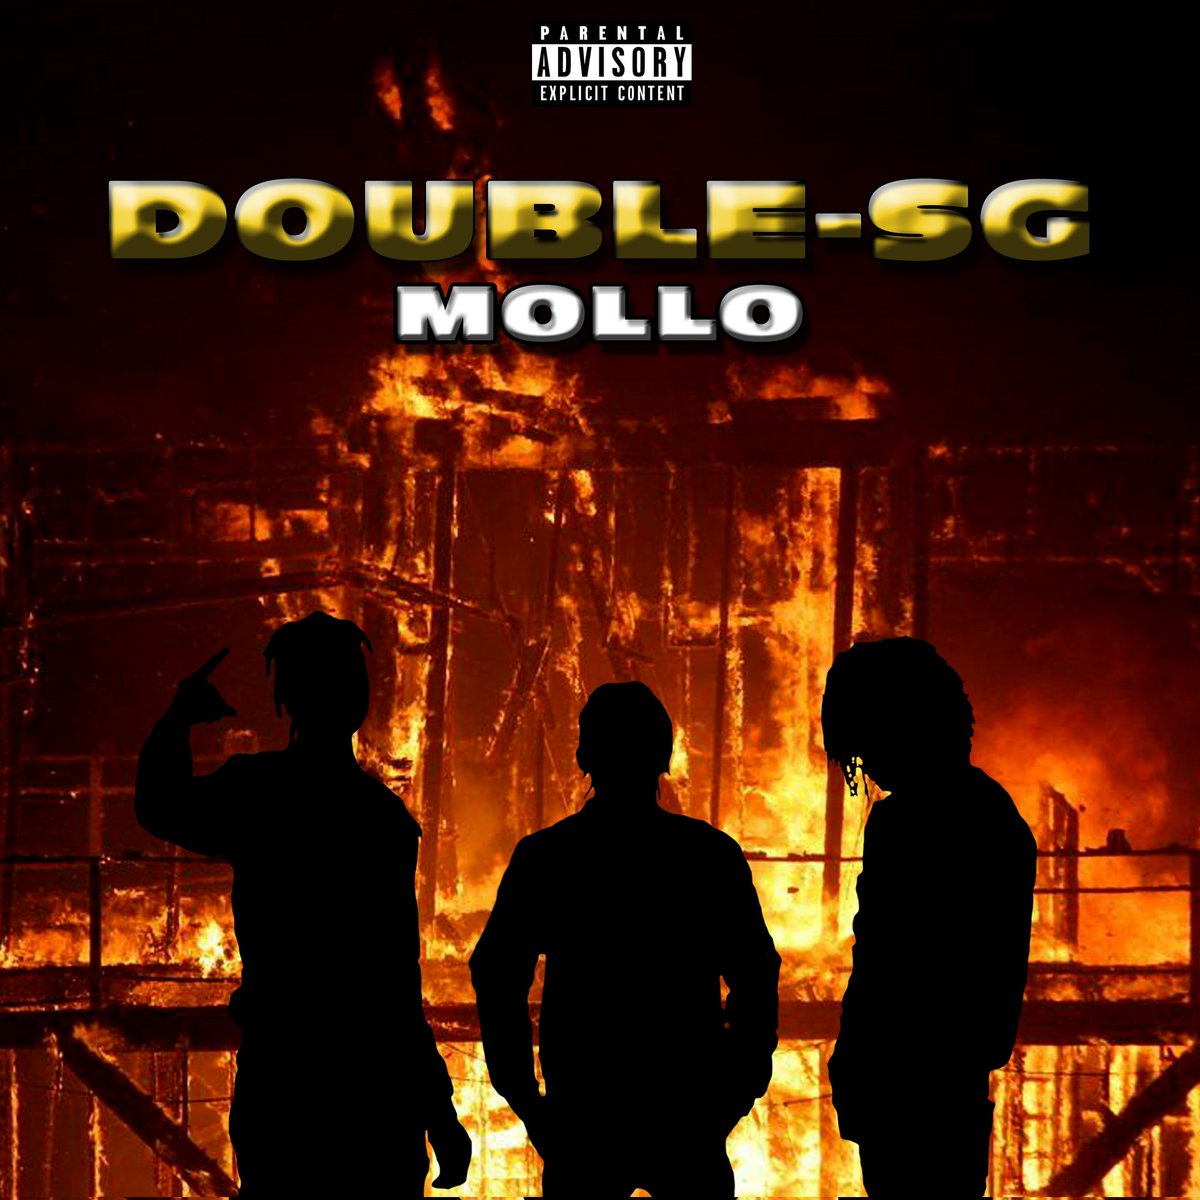 #SSG_ENTERTAINMENT 
#SESHEGO 
#DOUBLE_SG 

Double-SG - Mollo now Out on the following platforms 

soundcloud.com/ssgentertainme…

audiomack.com/ssg-entertainm…

youtube.com/watch?v=hExFG6…

#FRESHMUSICFRIDAY